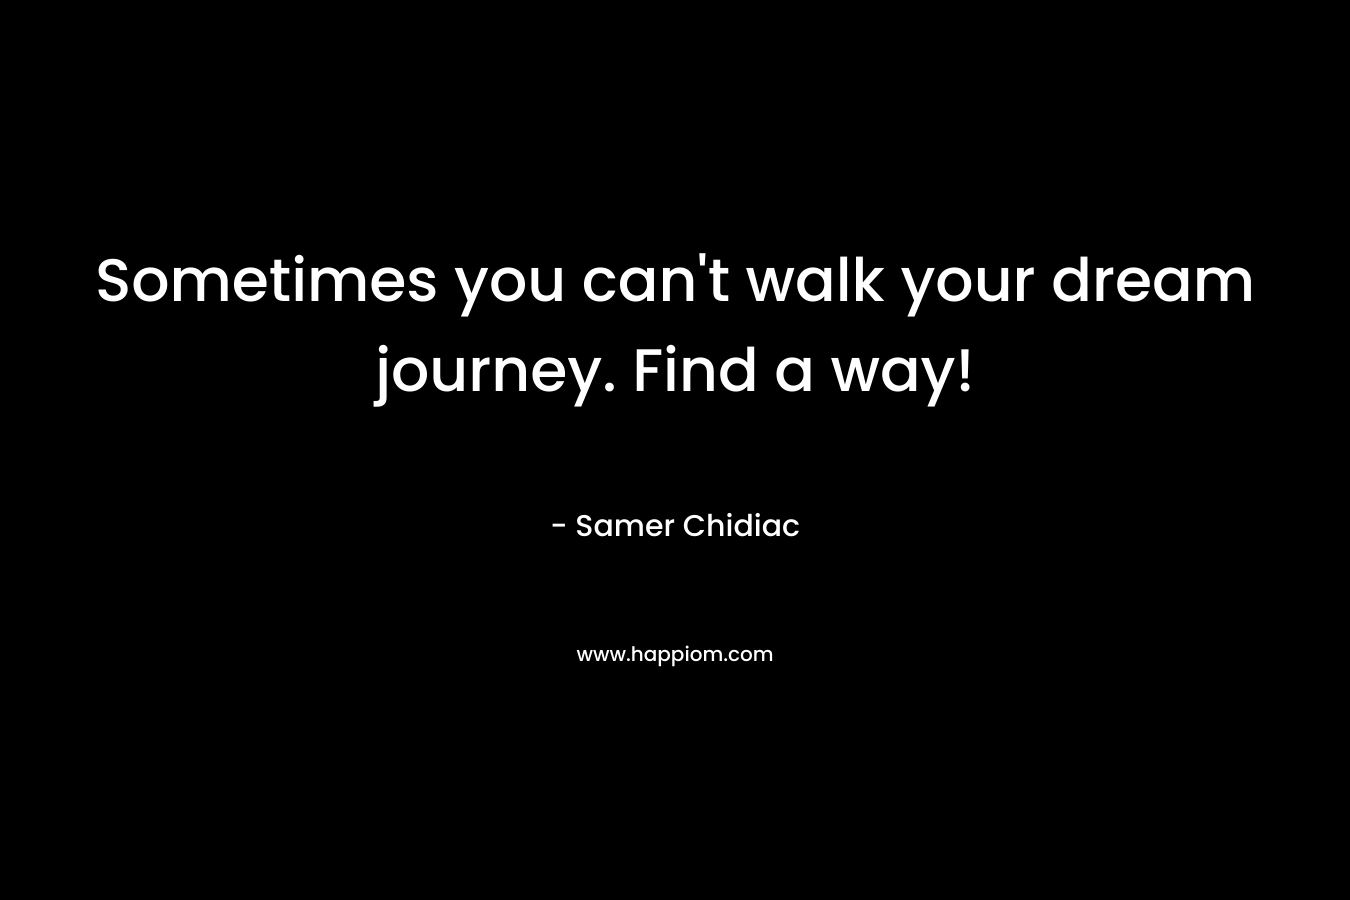 Sometimes you can't walk your dream journey. Find a way!